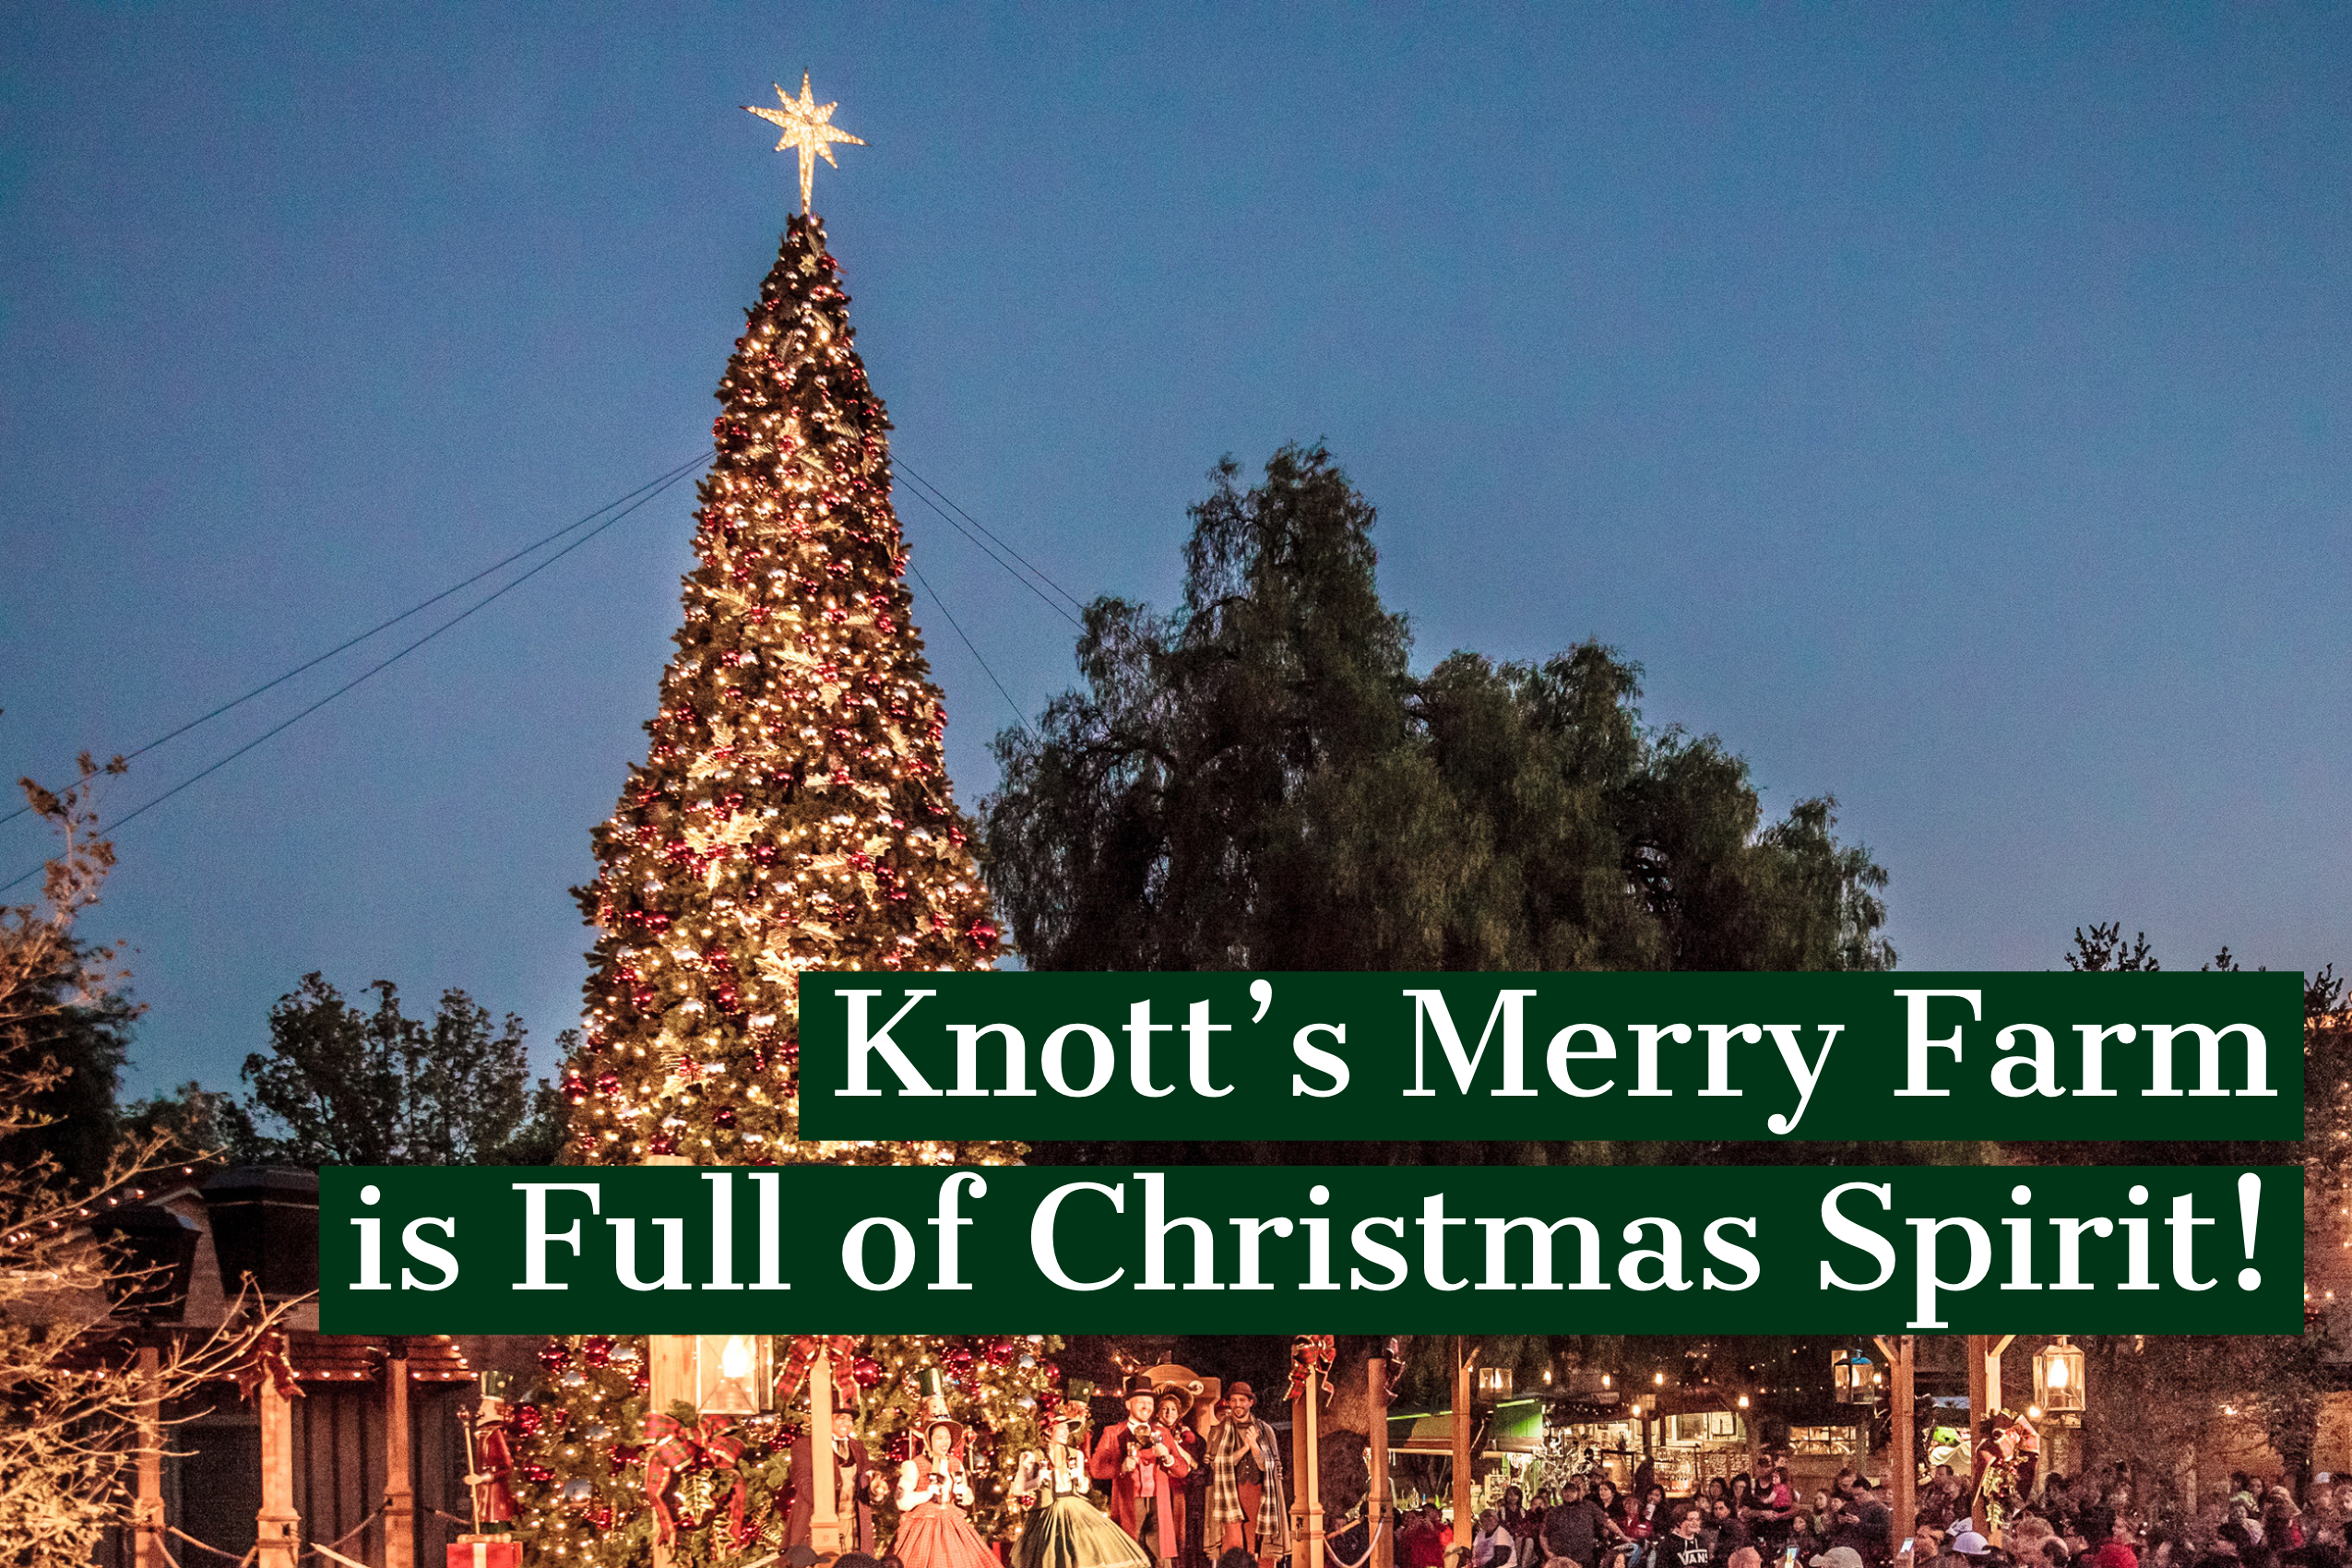 Knott’s Merry Farm Offers More Merriment Than Ever for People Visiting Knott’s Berry Farm this Christmas Season!